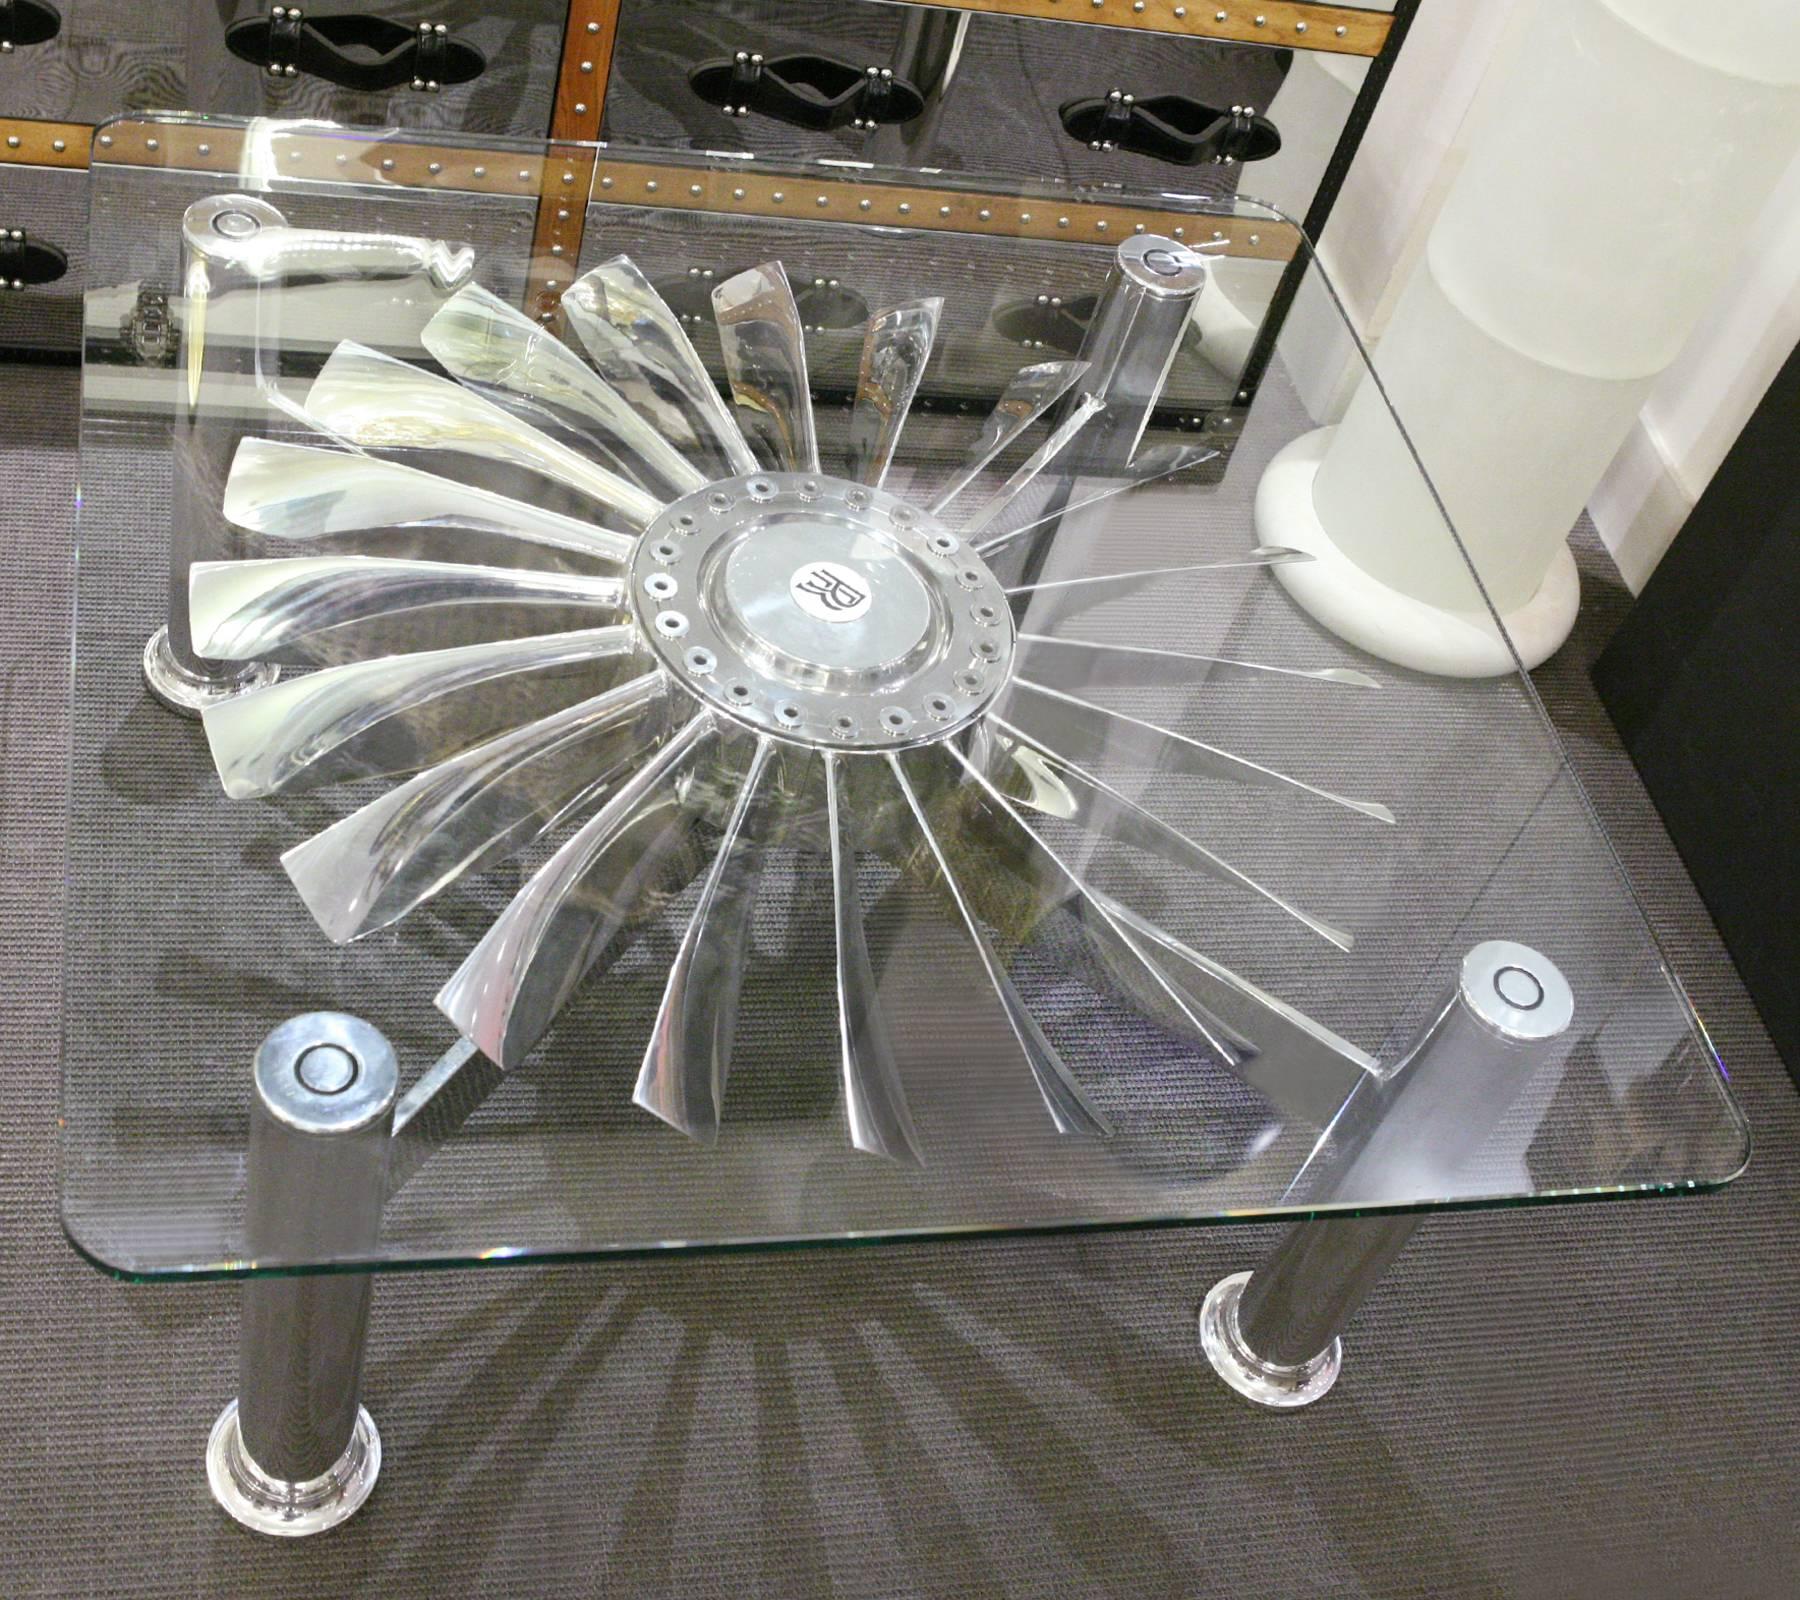 Coffee Table Spey manufactured and designed by Rolls-Royce. 
A low-bypass engine turbofan by Rolls-Royce. Used during 40 years
for civil airline jet. The Spey was used for military engines too, designed
engine RB168 for the McDonnell Douglas F-4